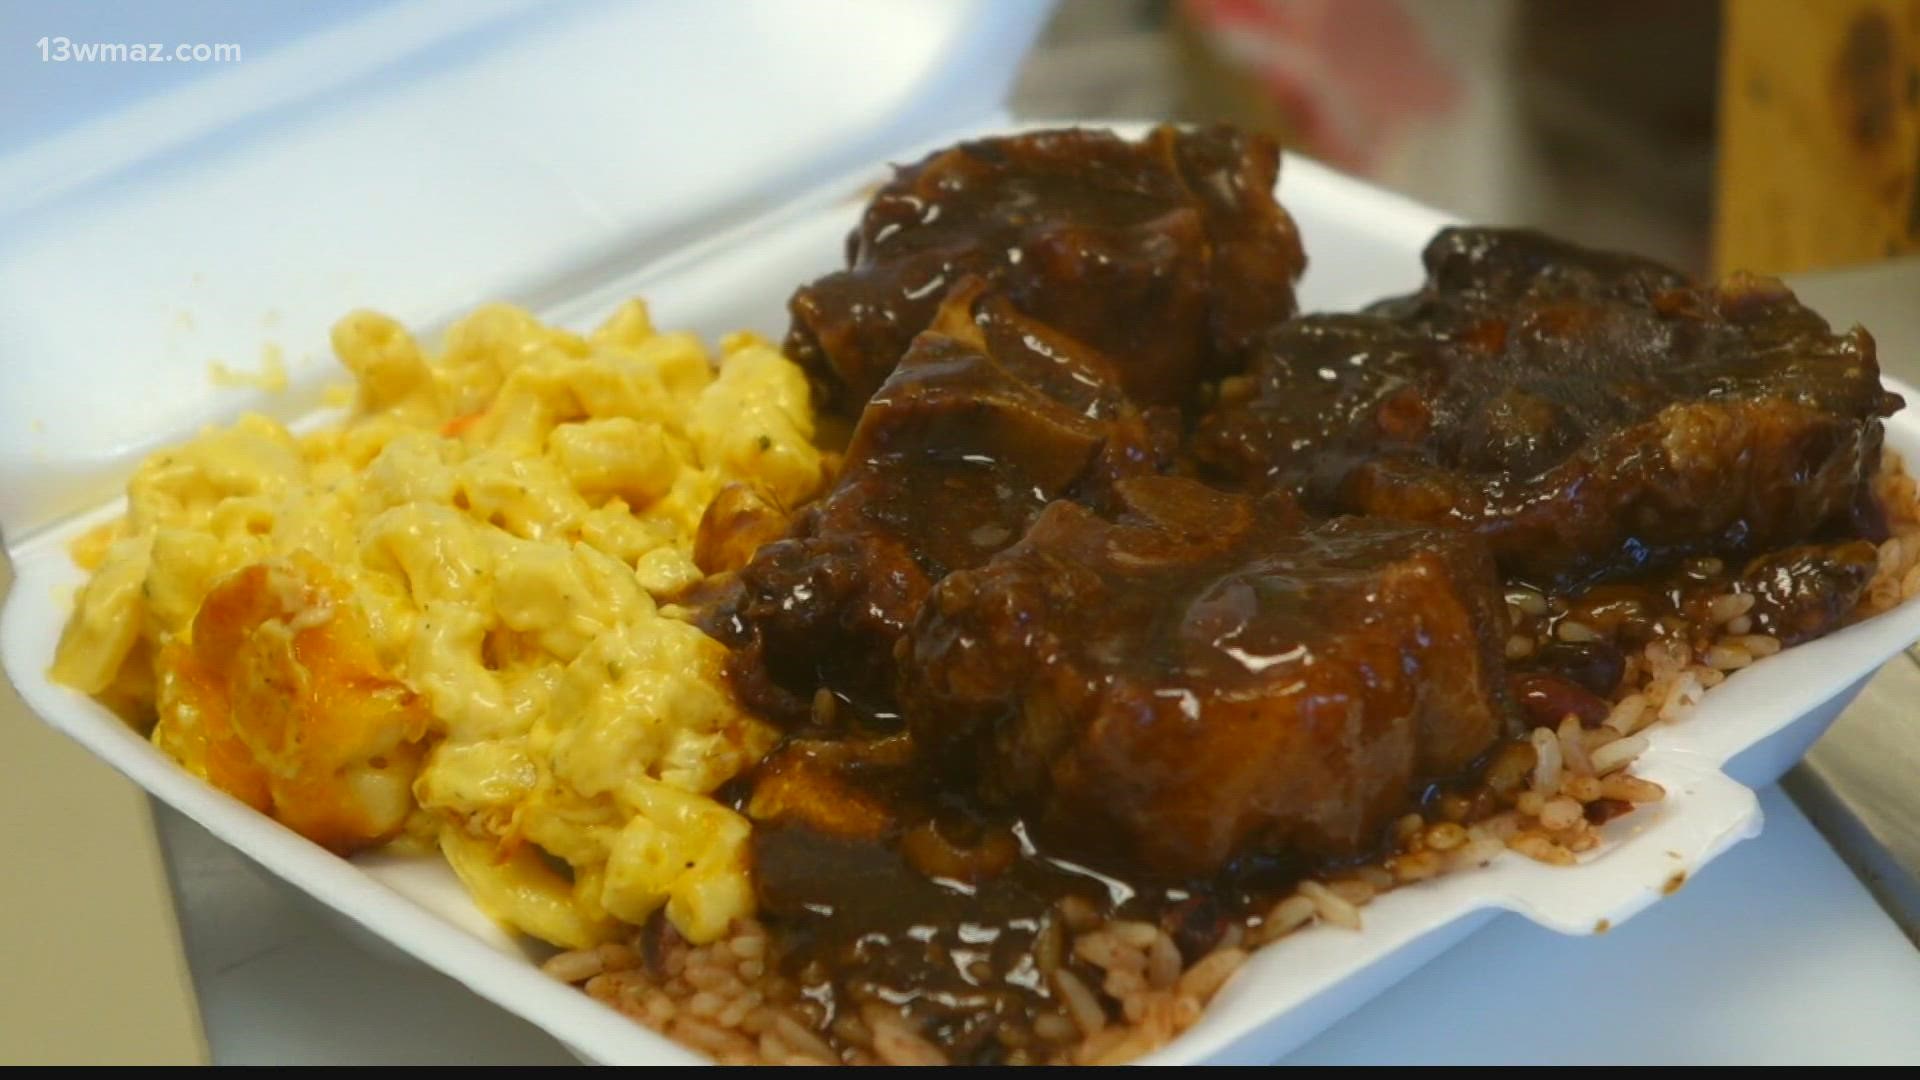 Right off GA-247 in Macon is Island Pot JA -- a little spot selling Jamaican cuisine that includes some of the spiciest foods in Central Georgia.